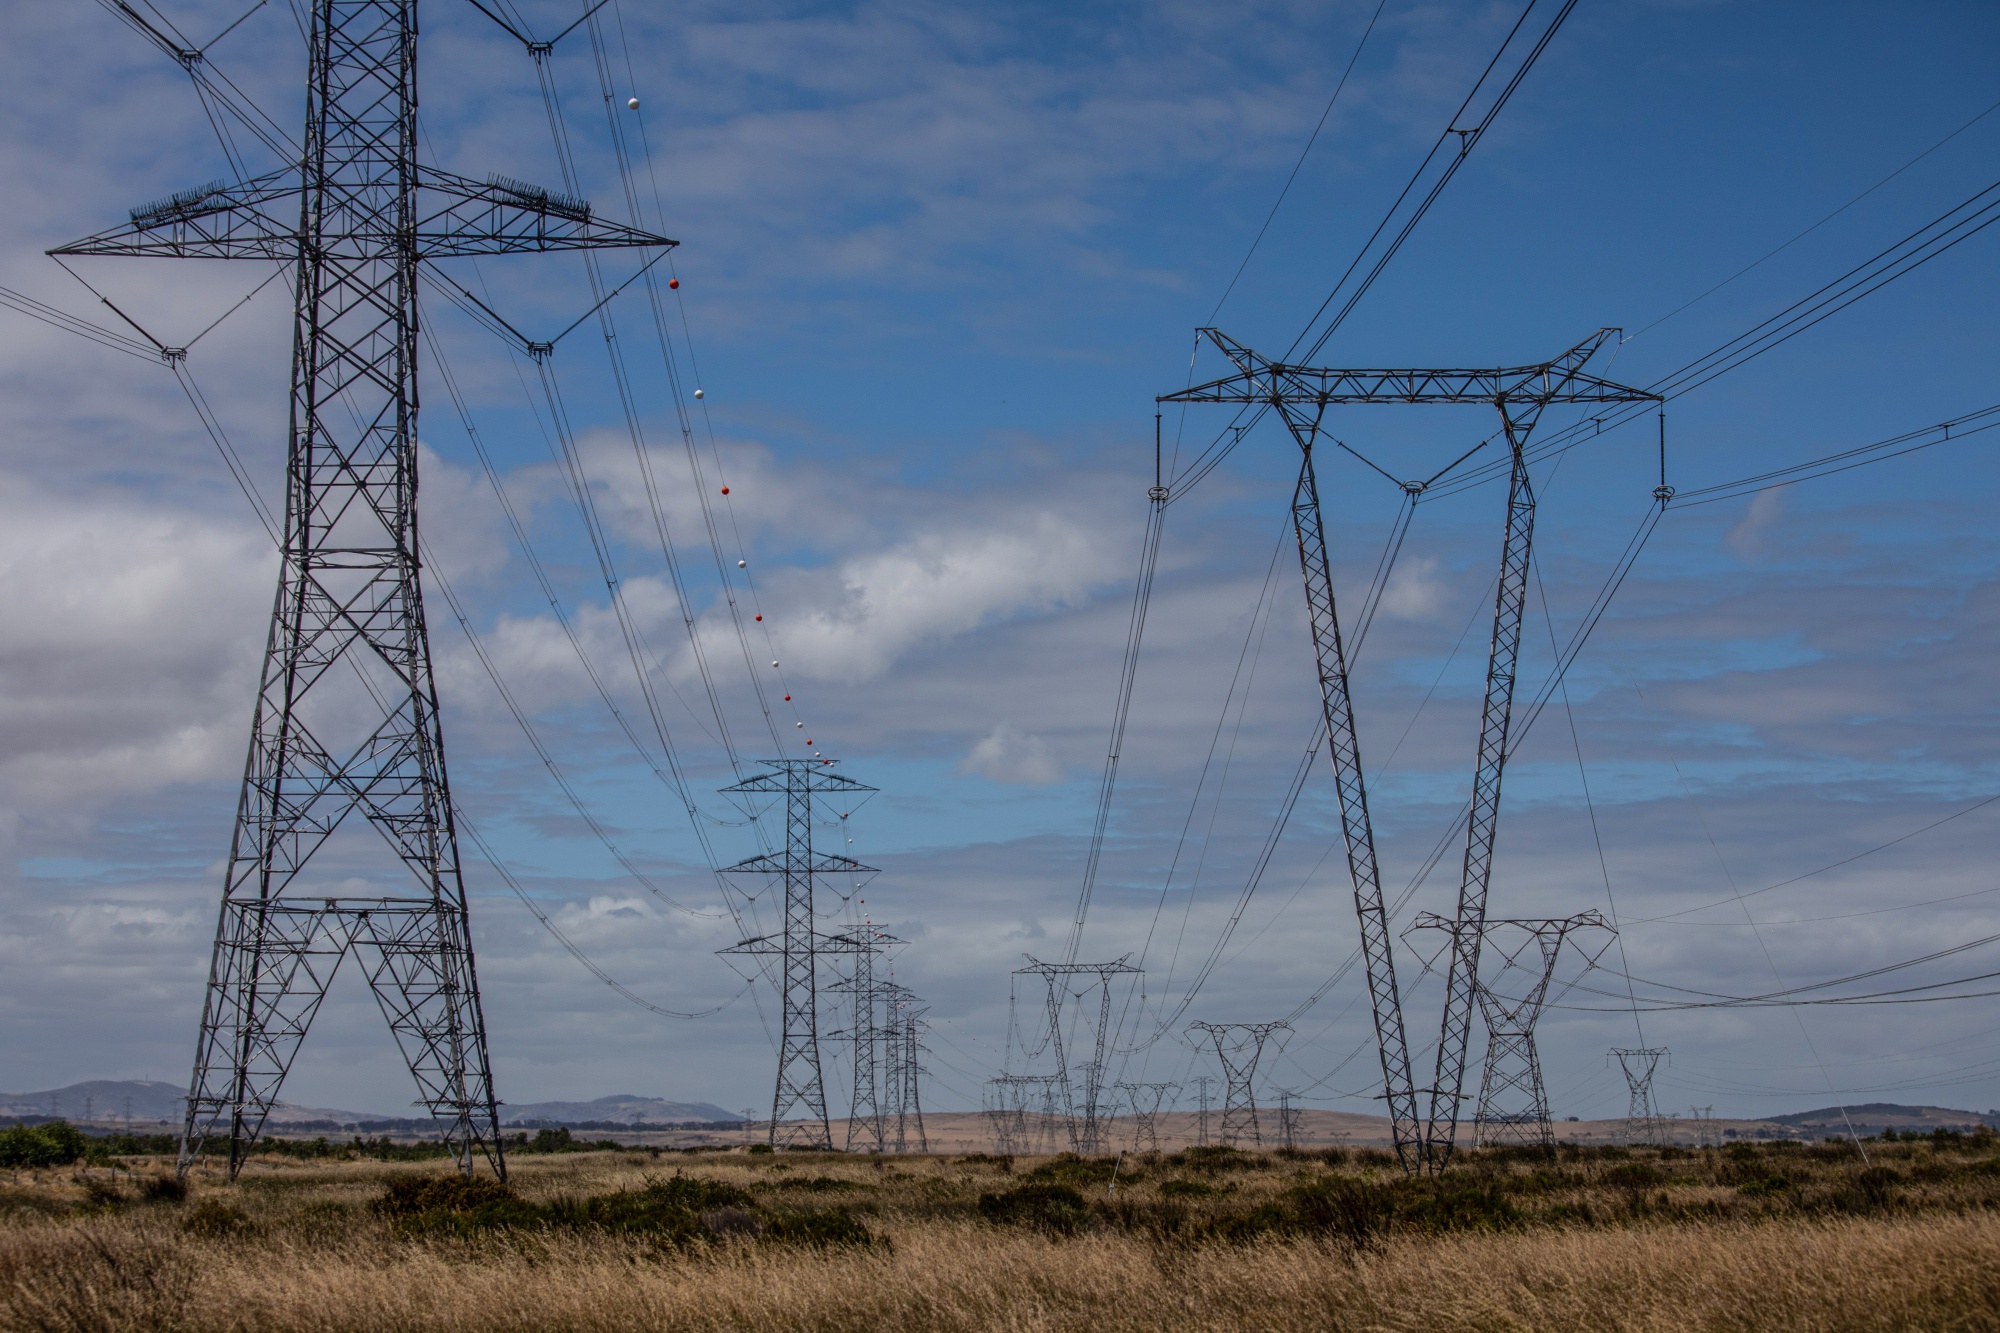 Electricity transmission pylons close to Koeberg&nbsp;nuclear power station, operated by Eskom Holdings SOC Ltd., in Cape Town, South Africa.